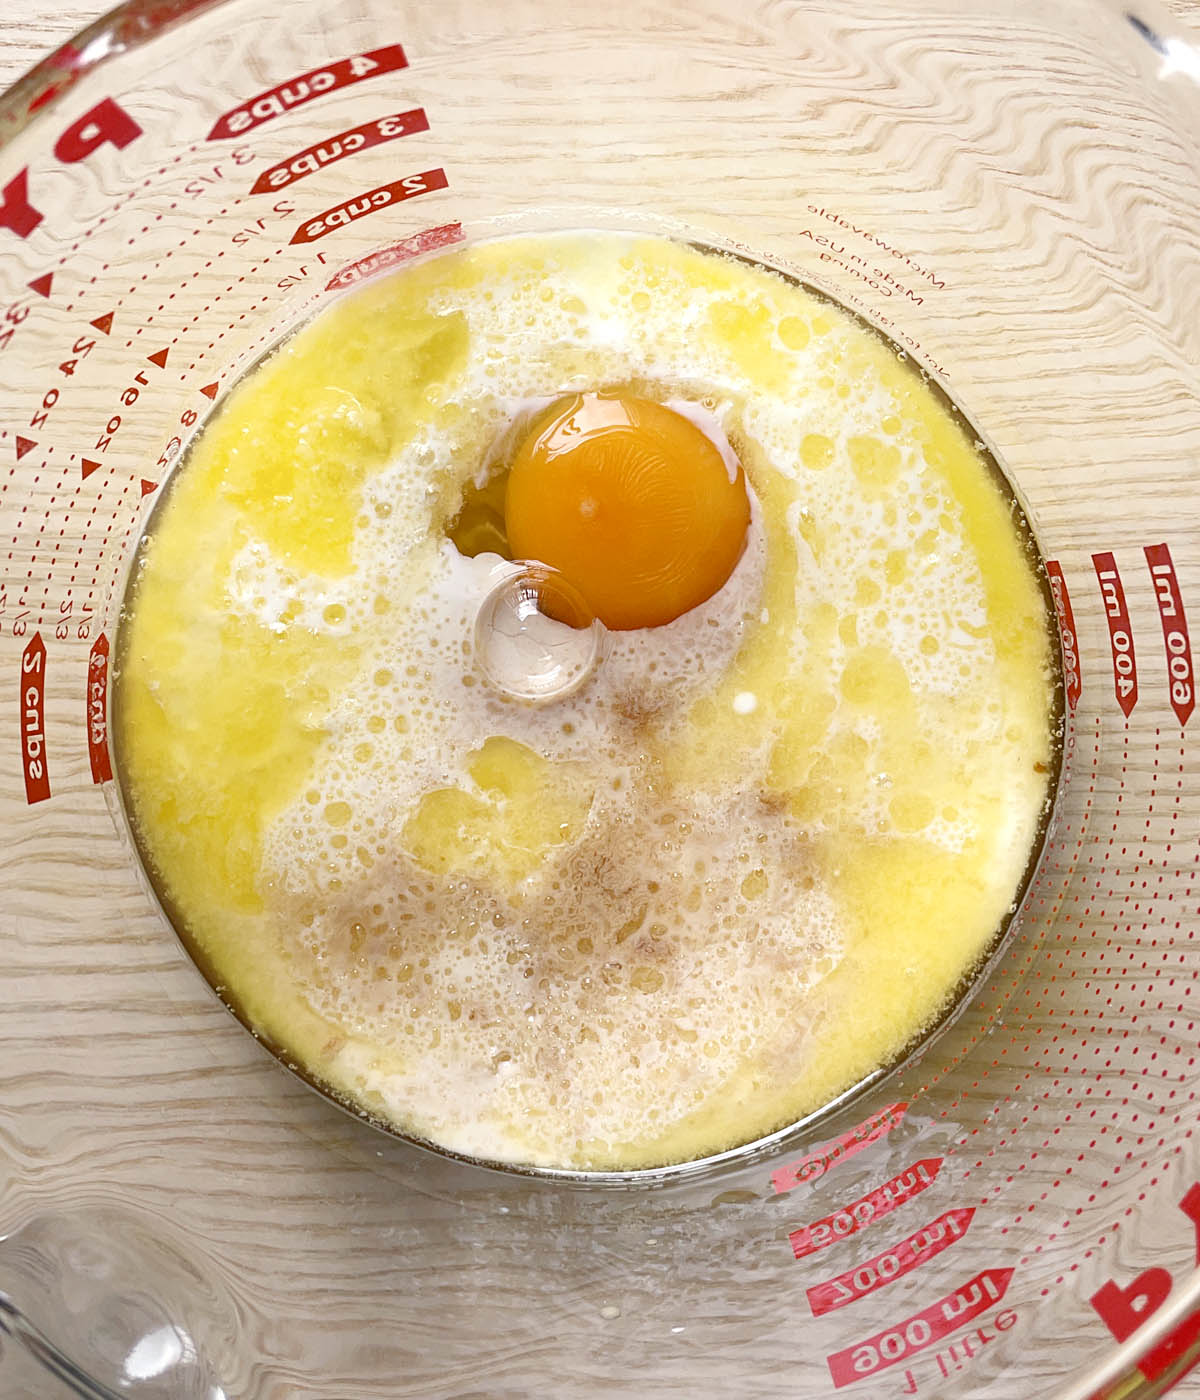 A round glass measuring cup containing an egg and yellow and white liquid.